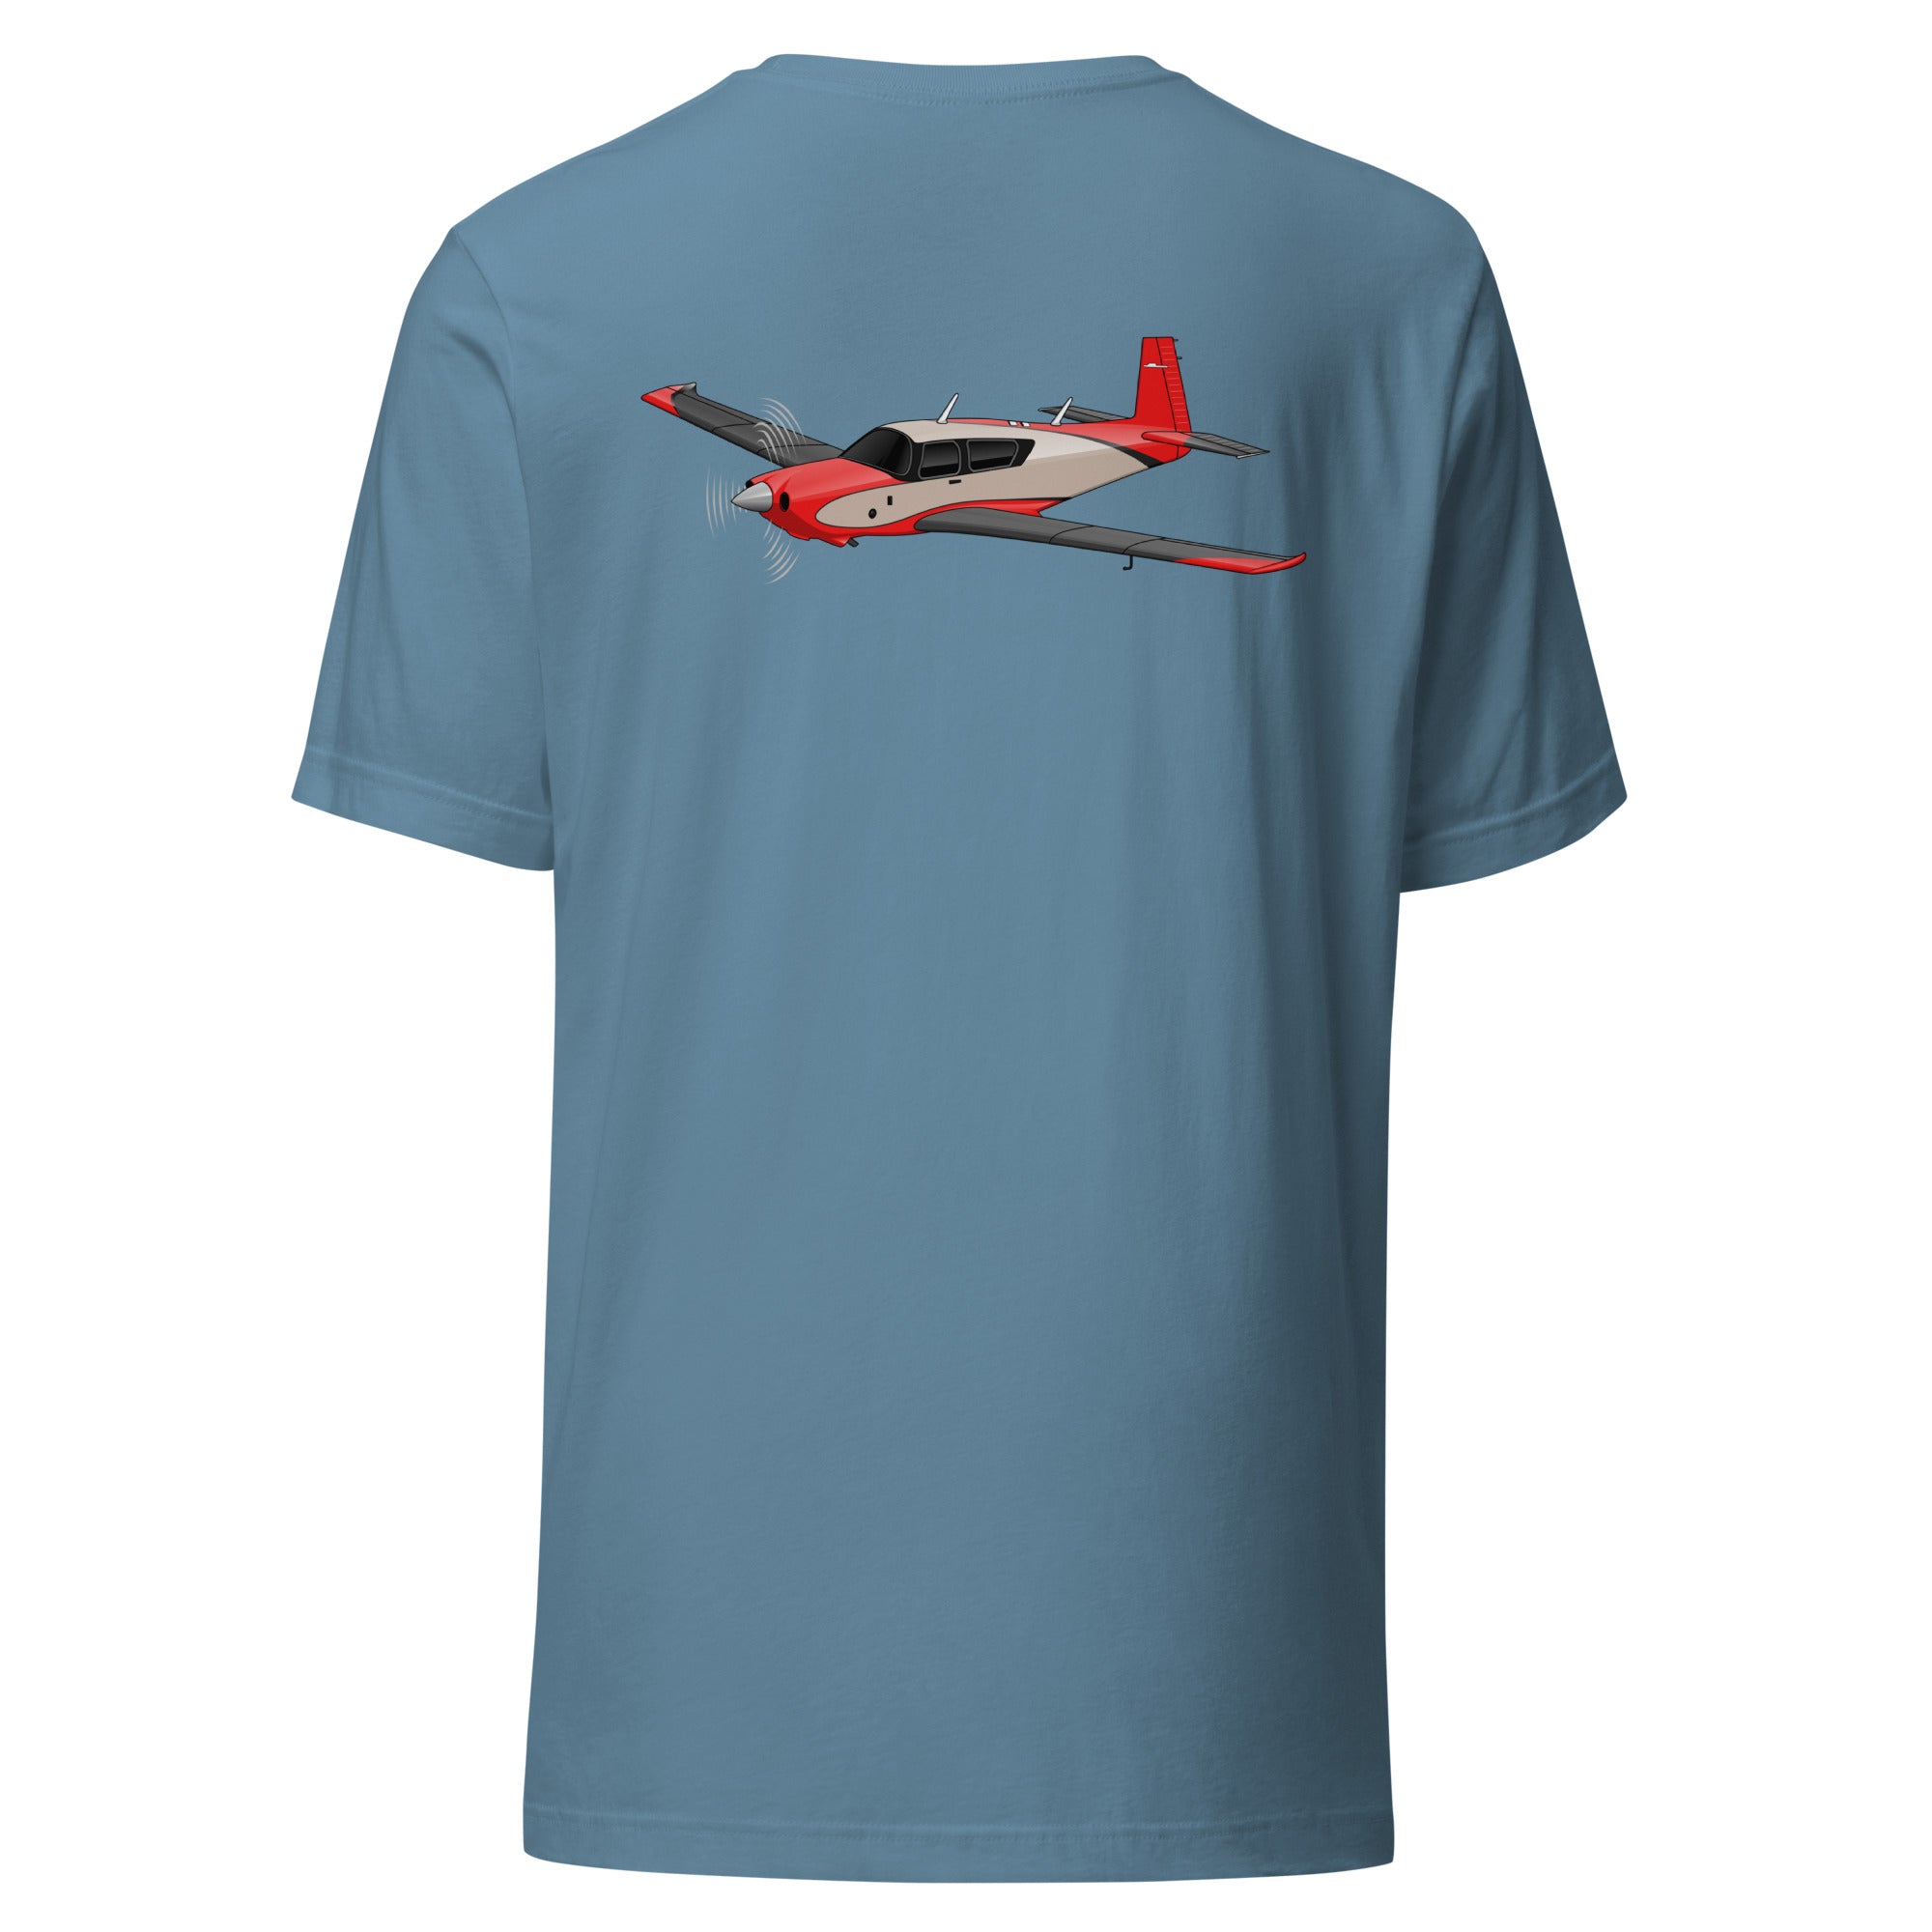 Mooney Back Print Unisex Bella+Canvas t-shirt by Ruck and Rotor